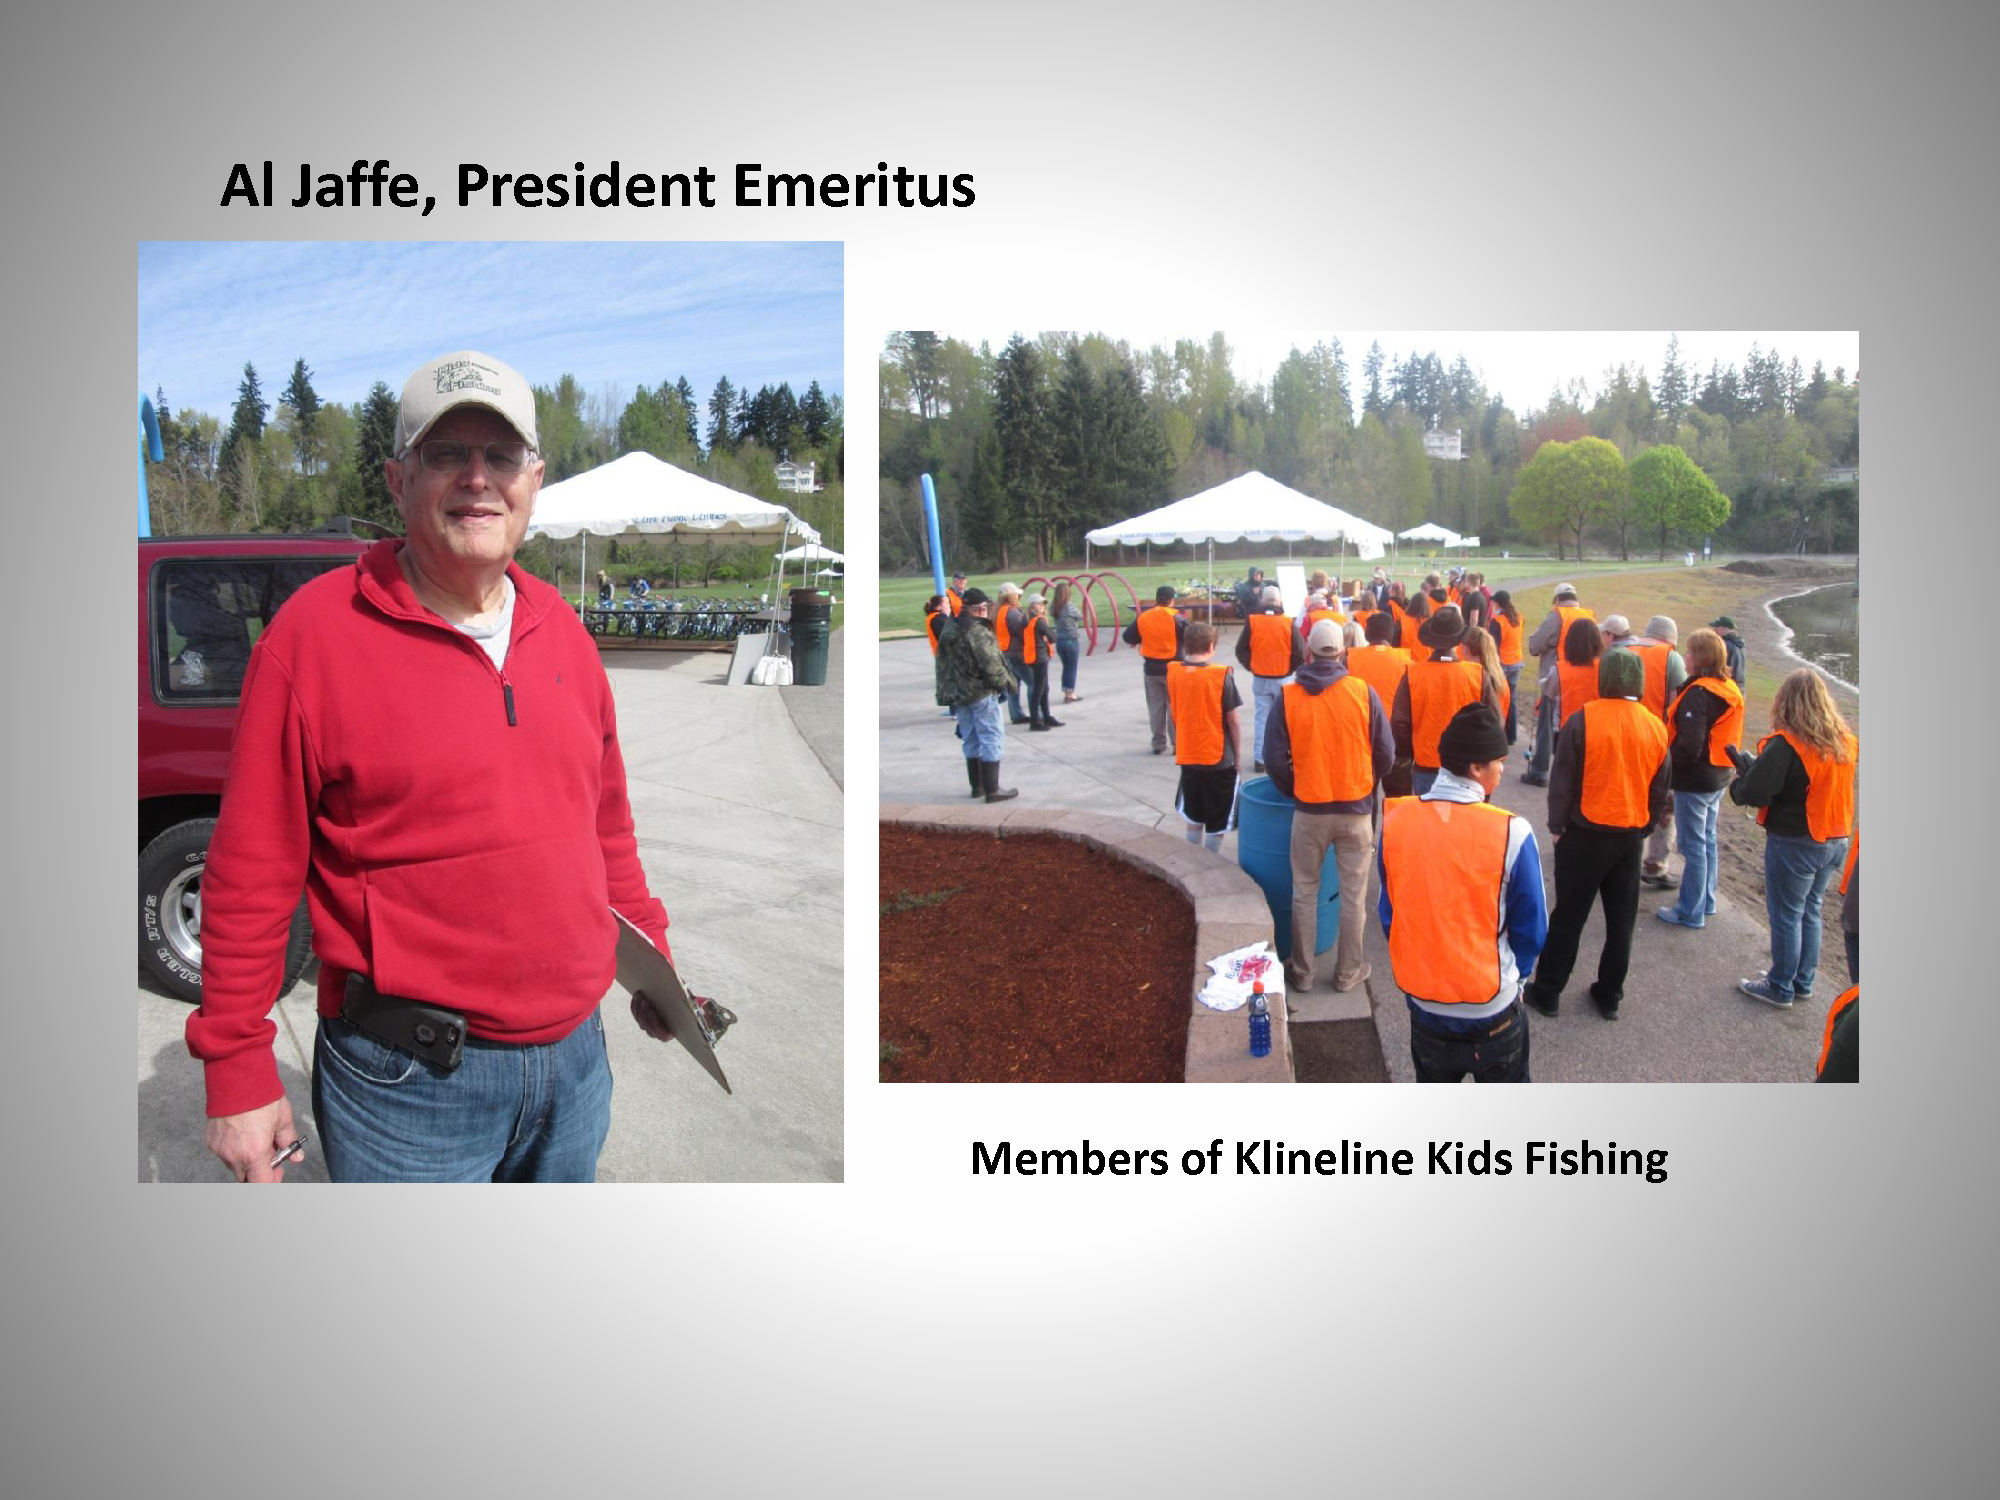 Weather doesn't deter children from annual Klineline Kids Fishing